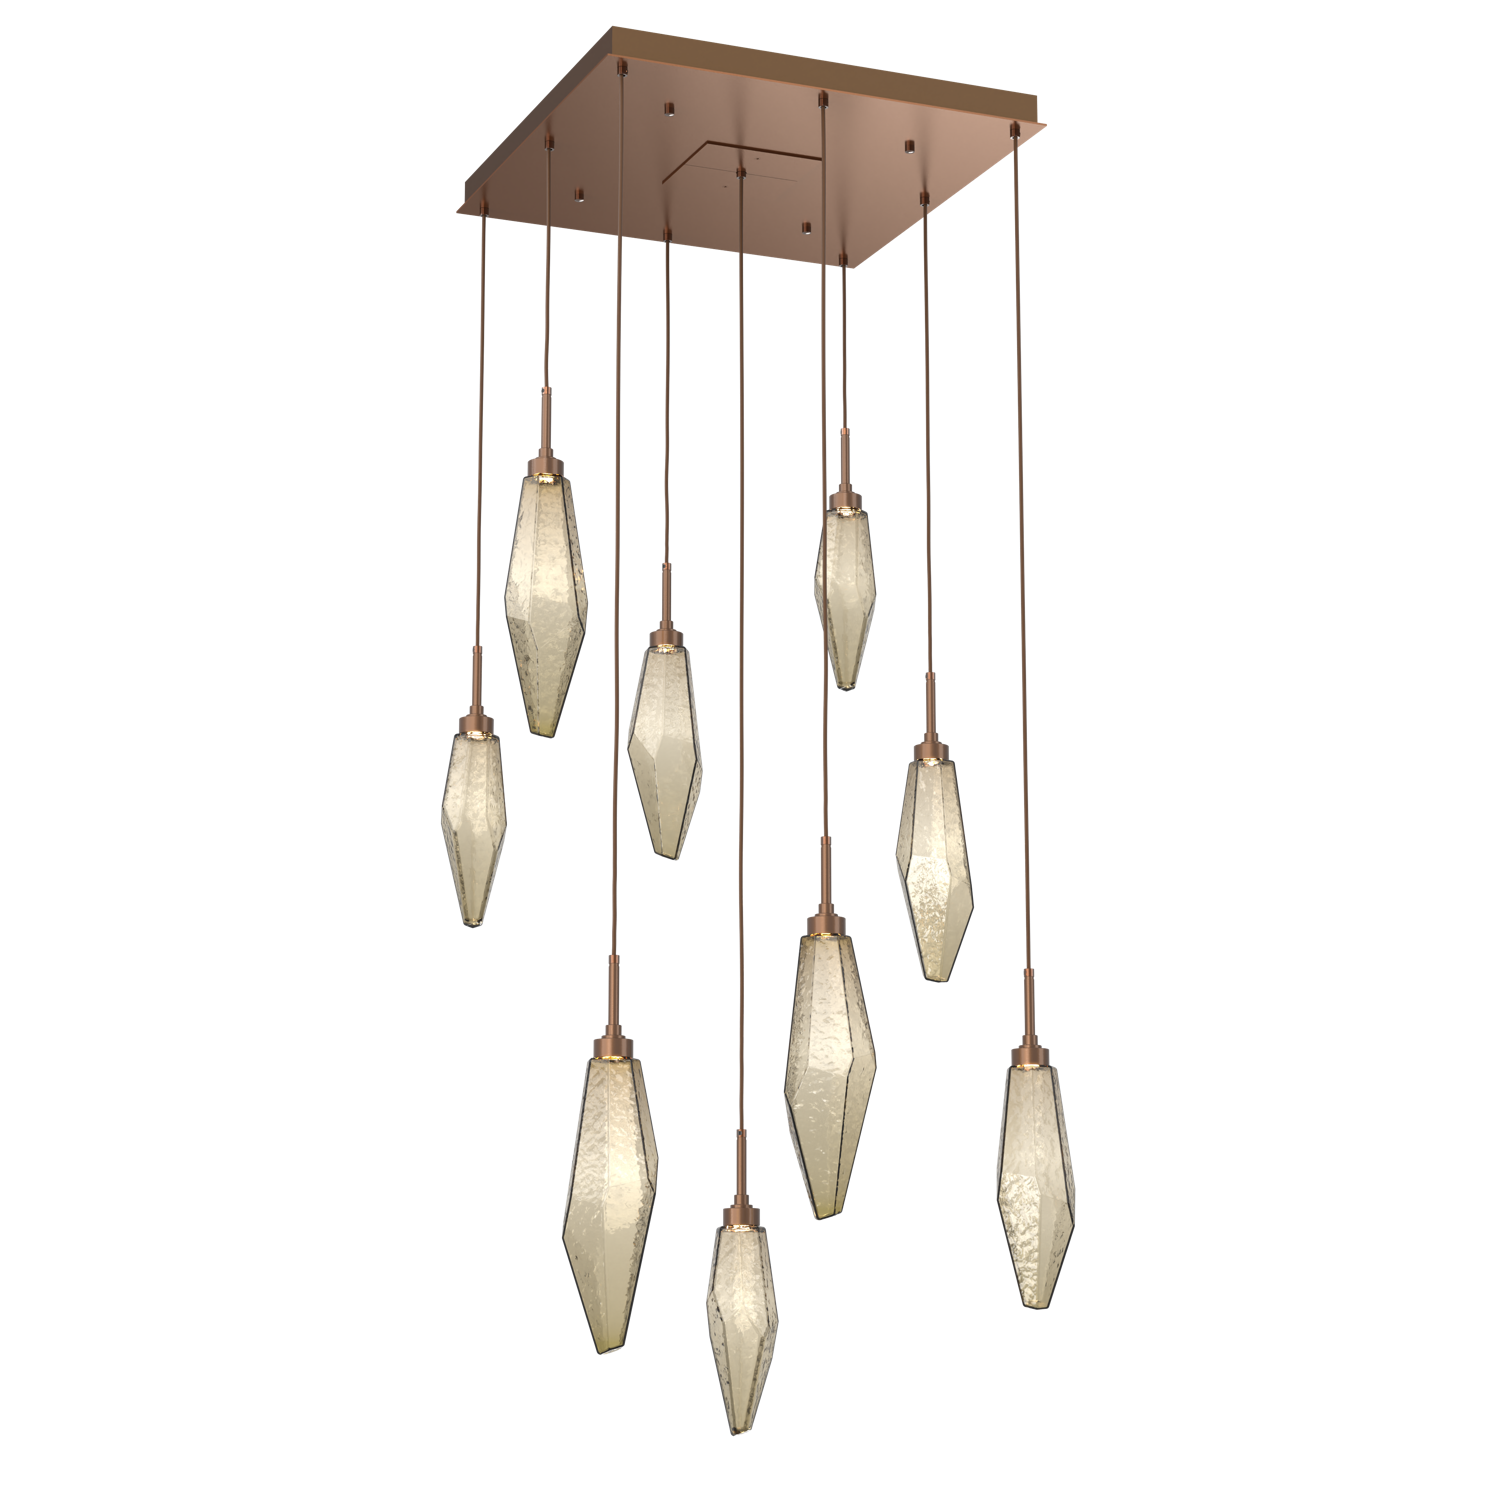 CHB0050-09-BB-CB-Hammerton-Studio-Rock-Crystal-9-light-square-pendant-chandelier-with-burnished-bronze-finish-and-chilled-bronze-blown-glass-shades-and-LED-lamping